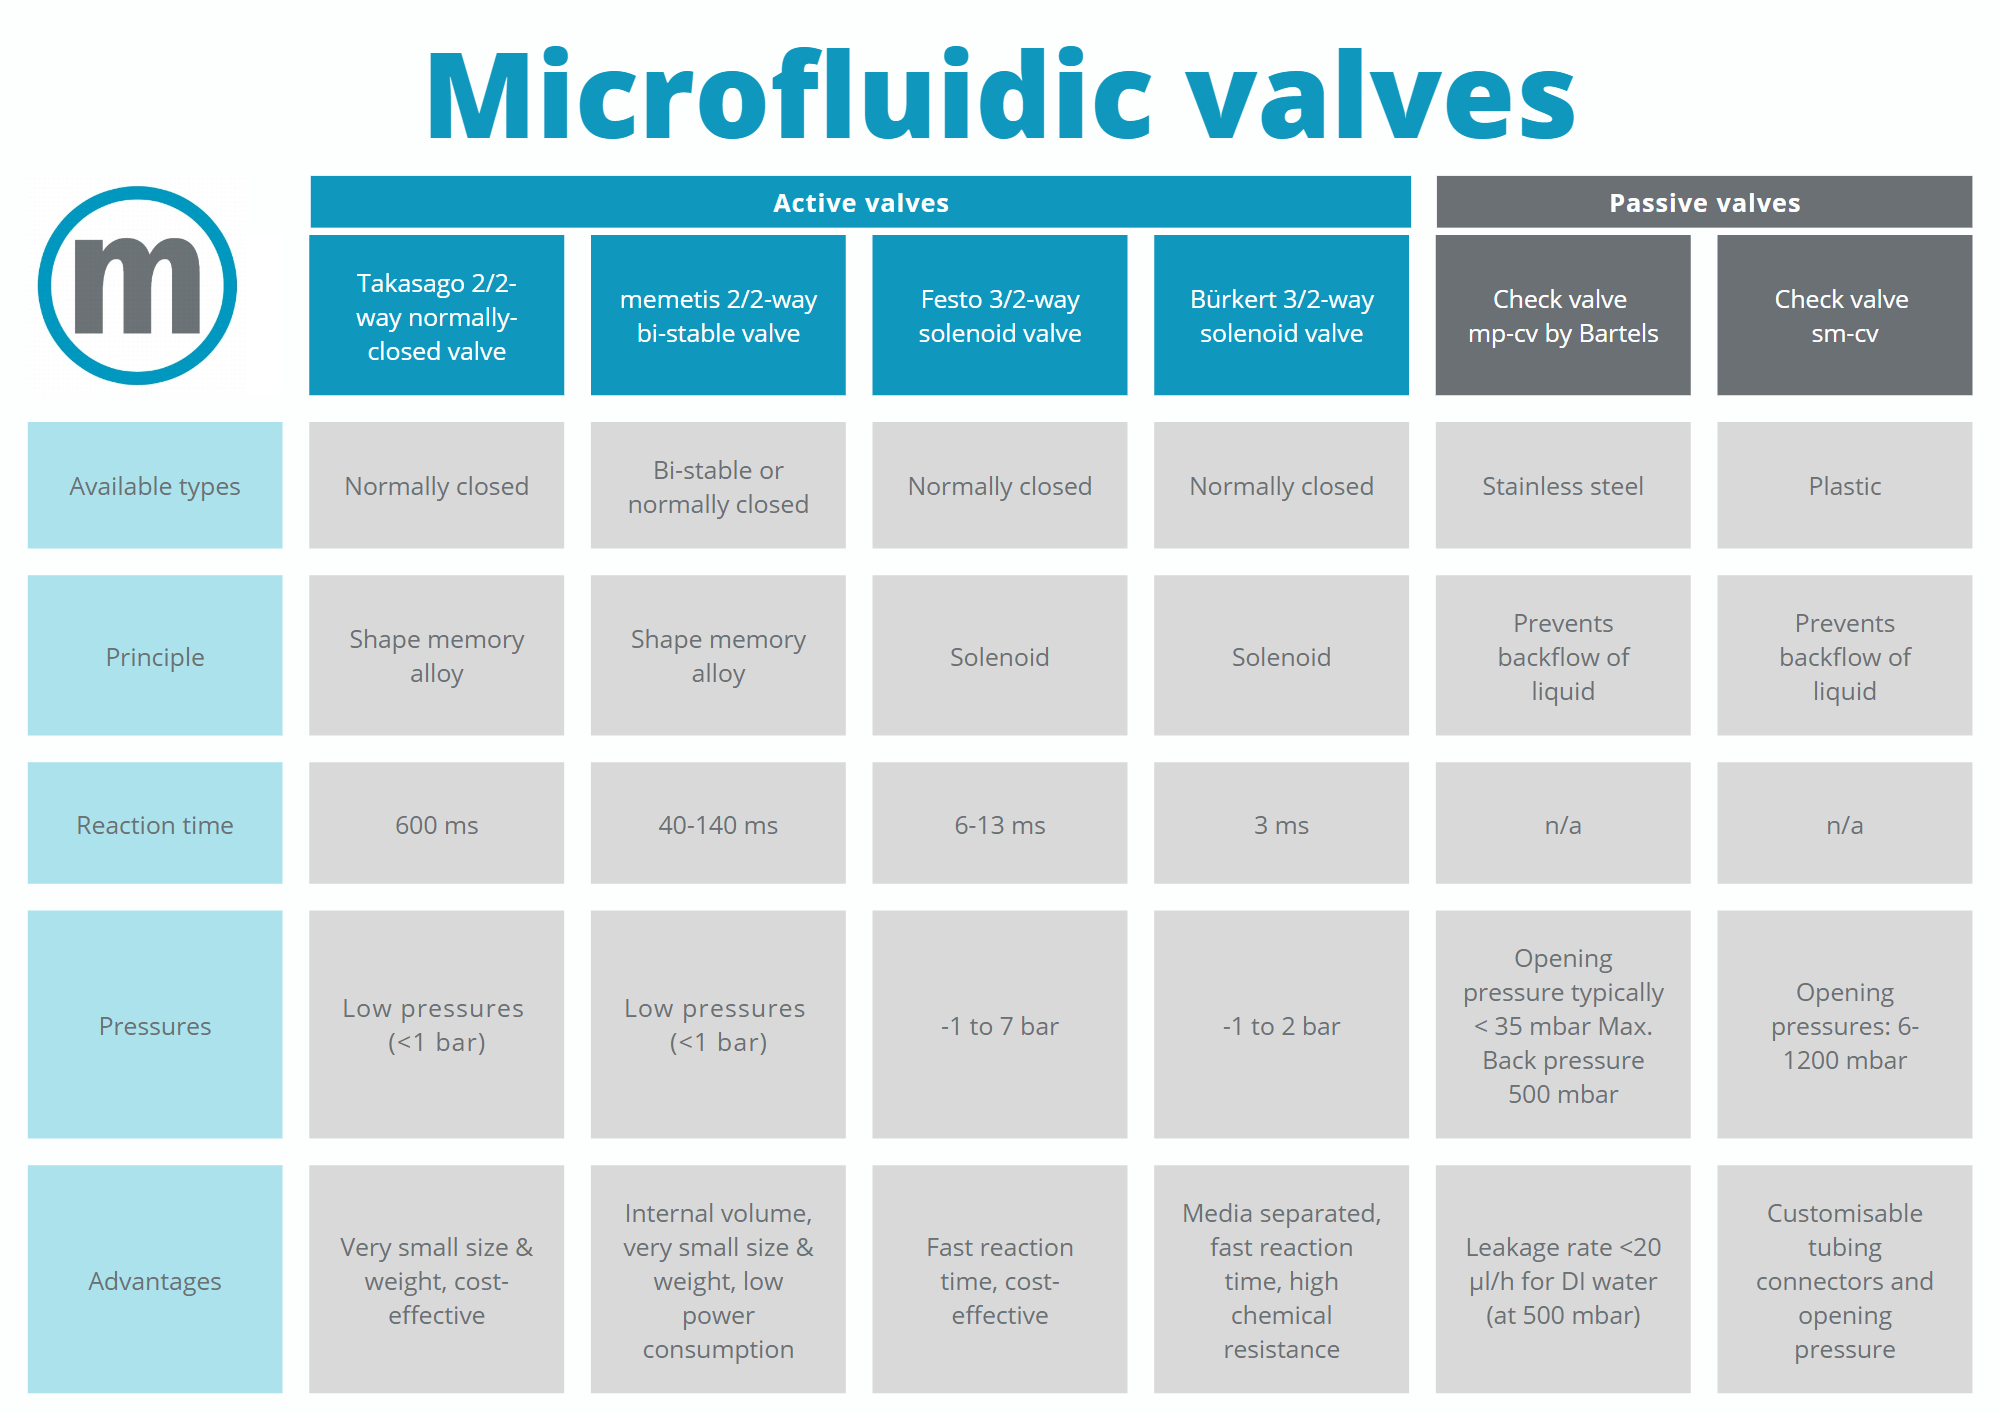 Comparison microfluidic valves. Comparing valvetype, working principle, reaction time, pressure and general advantages.